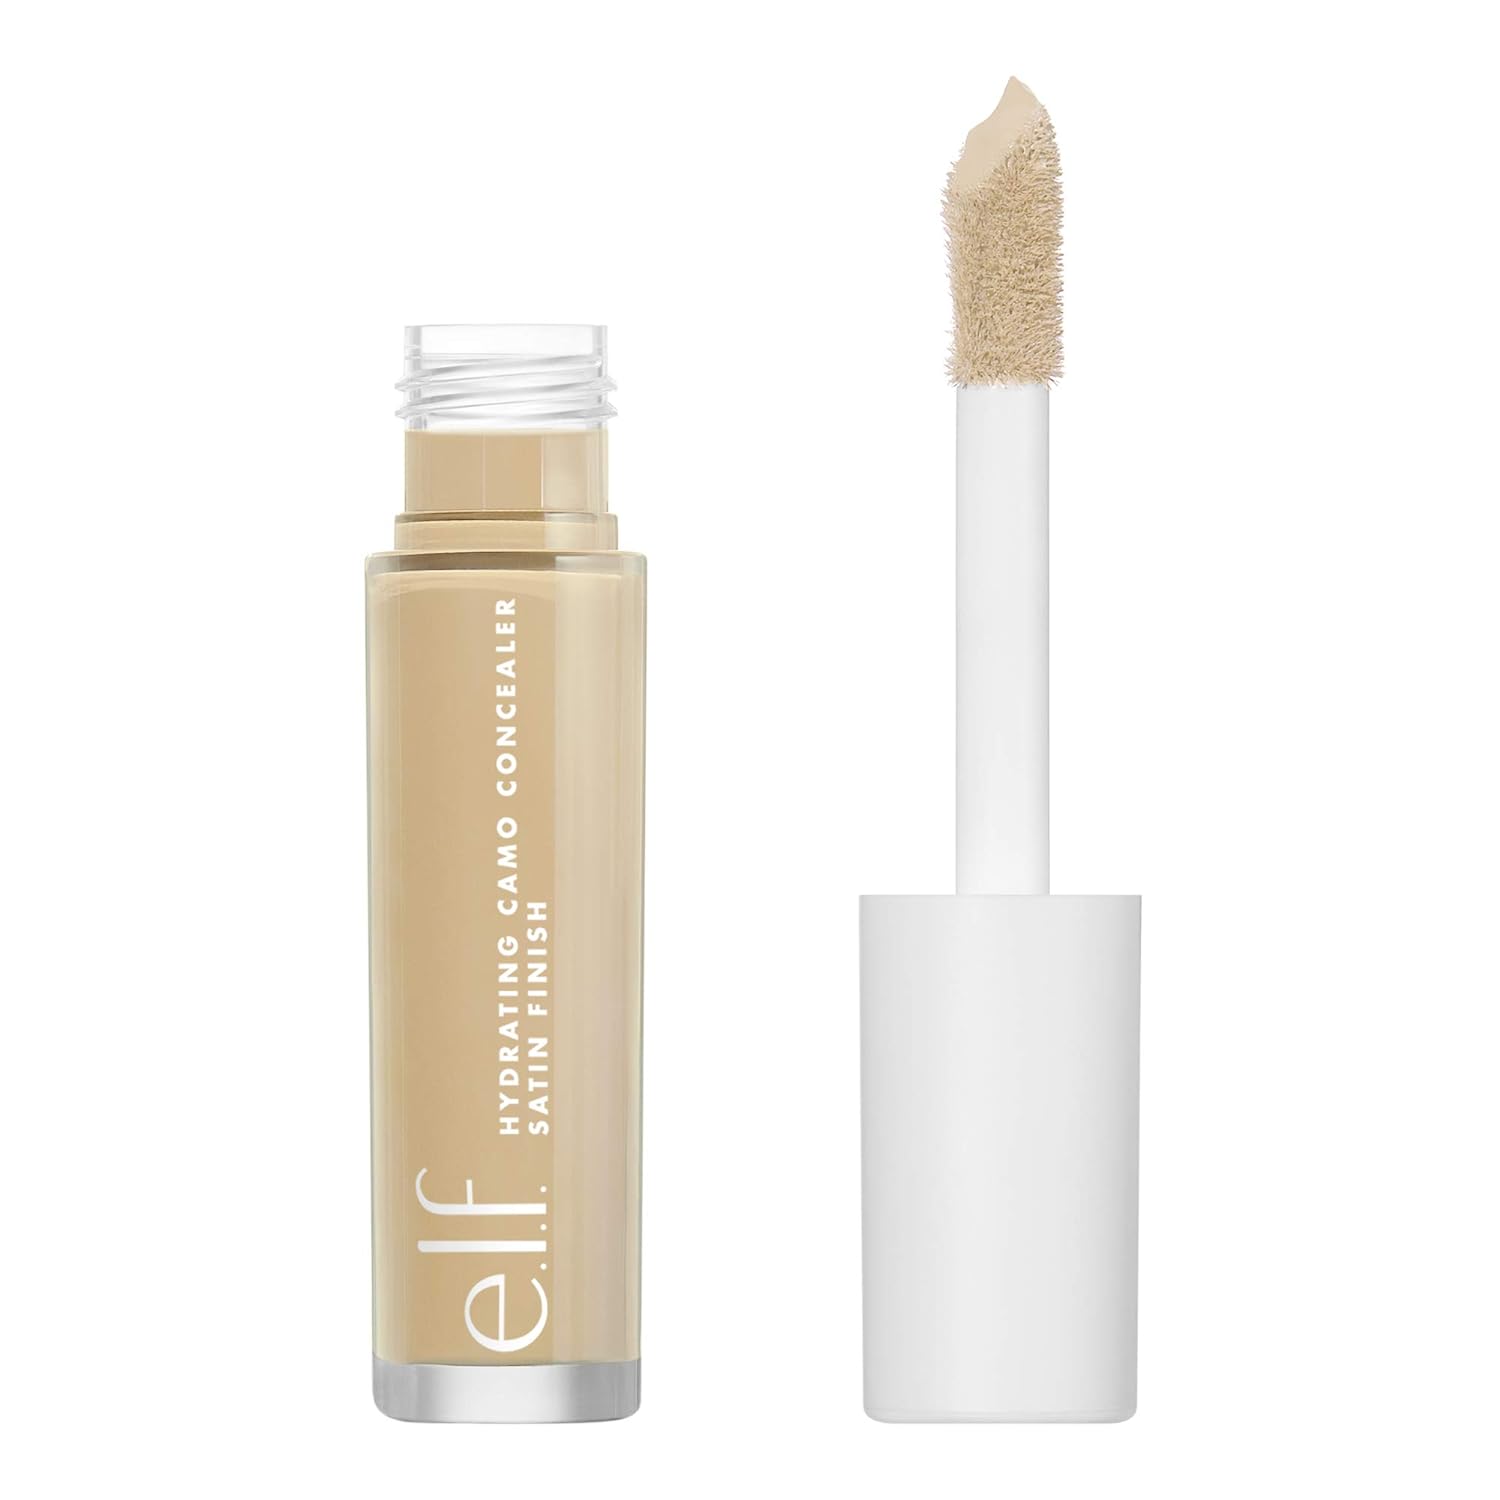  E.l.f. e.l.f, Hydrating Camo Concealer, Lightweight, Full Coverage, Long Lasting, Conceals, Corrects, Covers, Hydrates, Highlights, Medium Neutral, Satin Finish, 25 Shades, All-Day Wear,